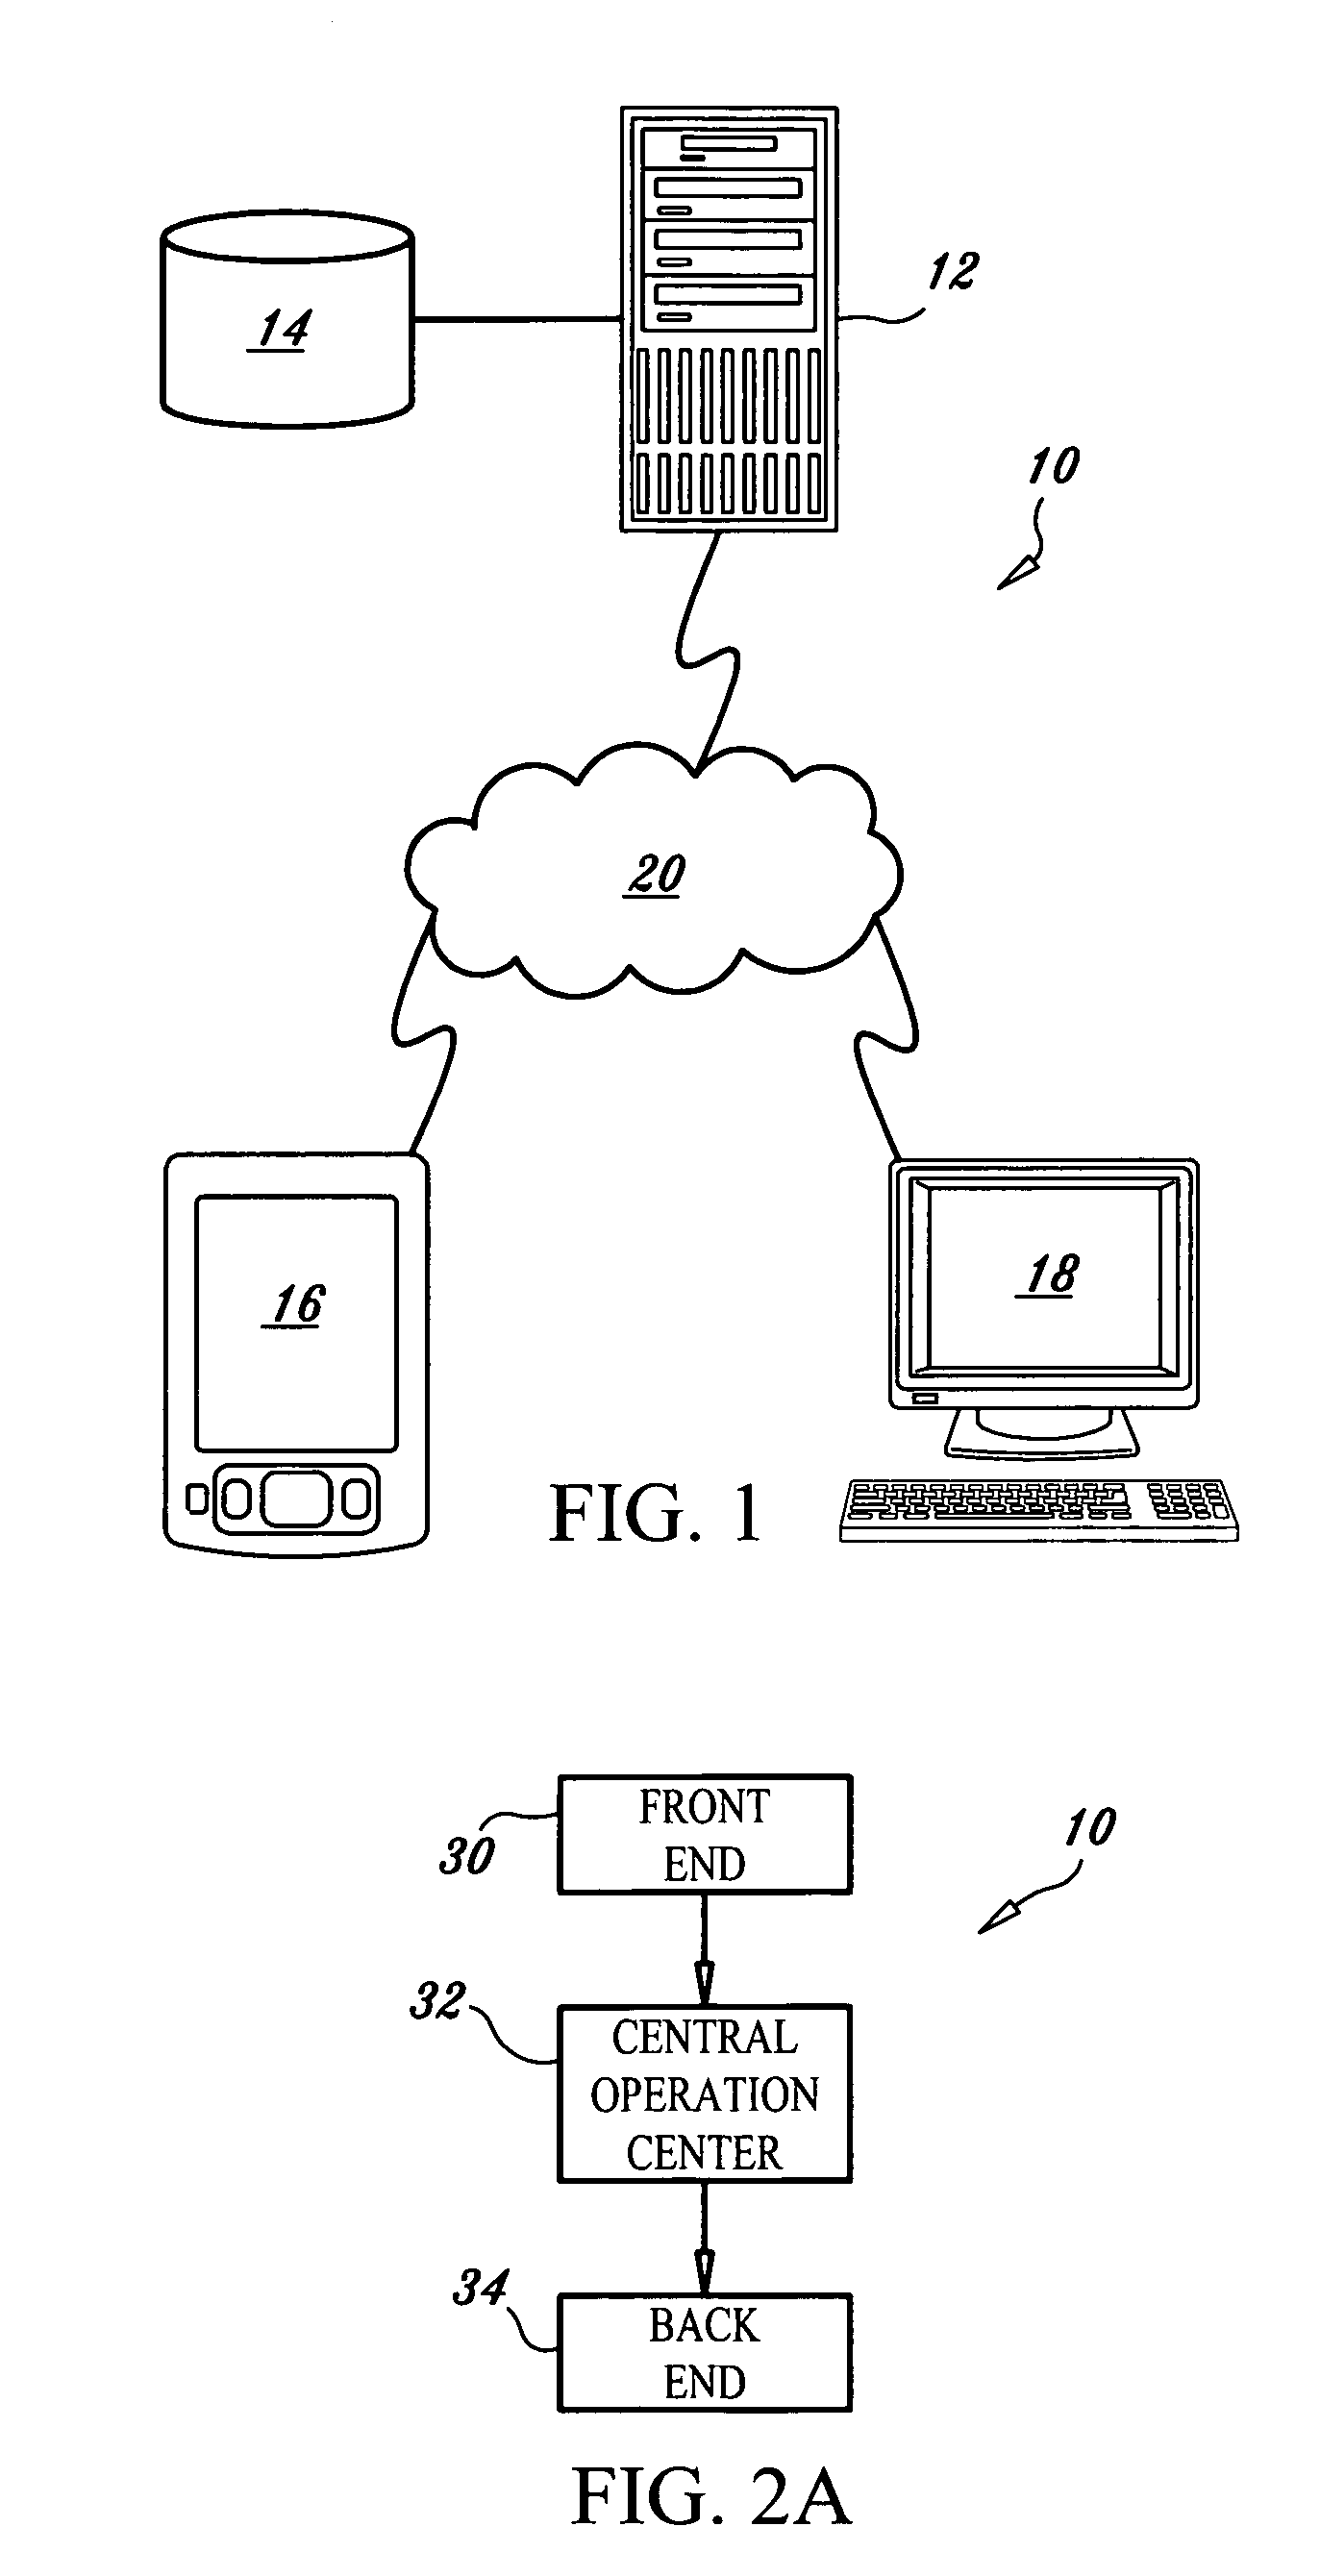 Appearel production method and system